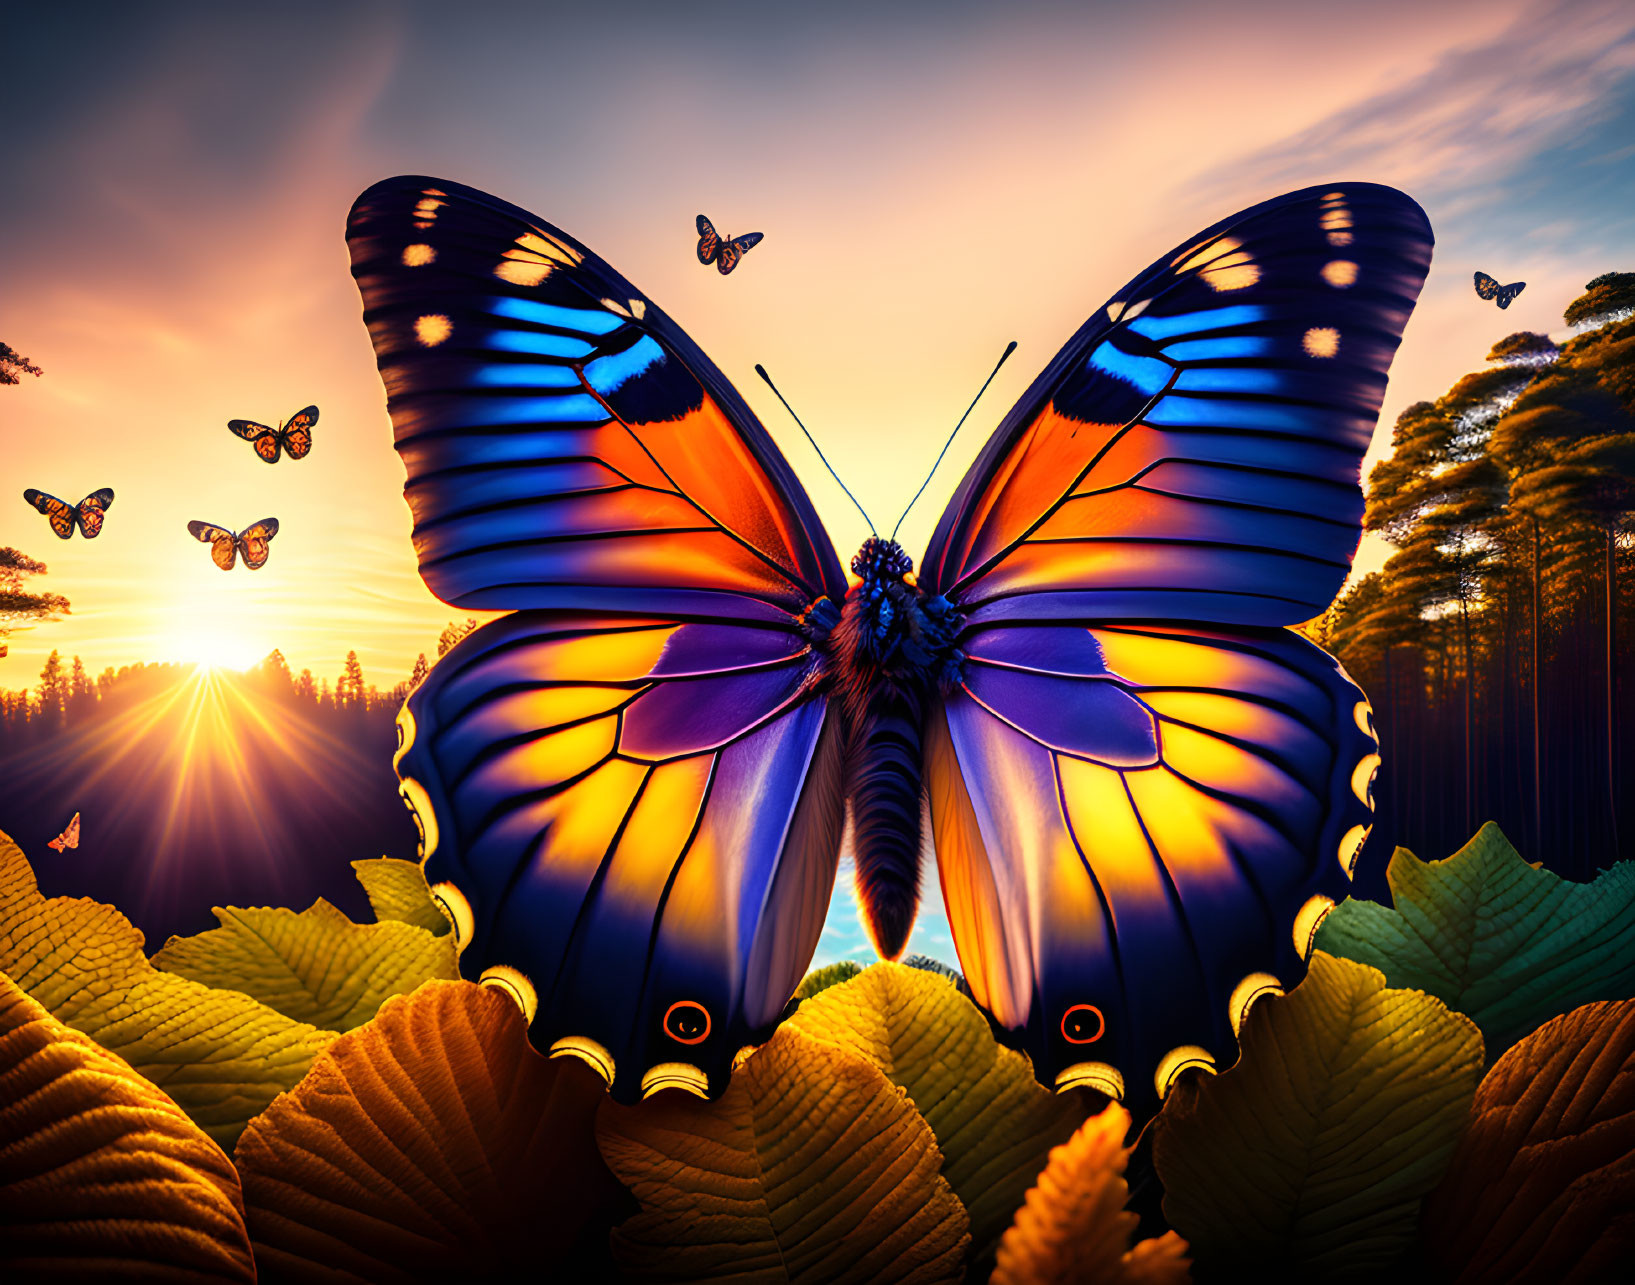 Colorful Butterfly with Blue and Orange Wings in Forest Scene